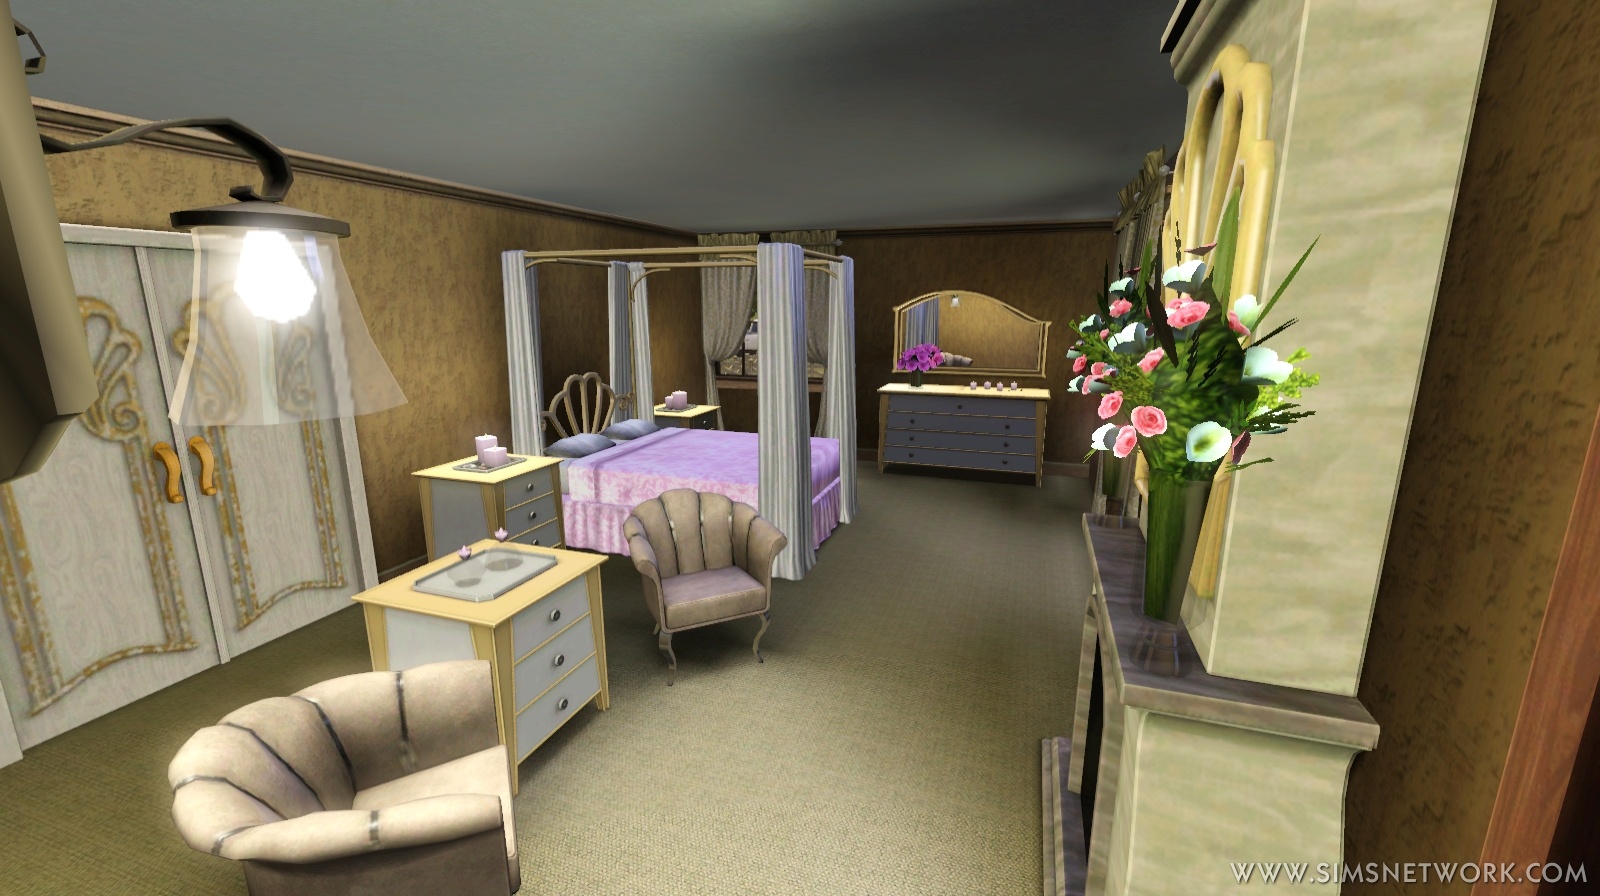 The Sims 3 Master Suite Stuff Review Snw